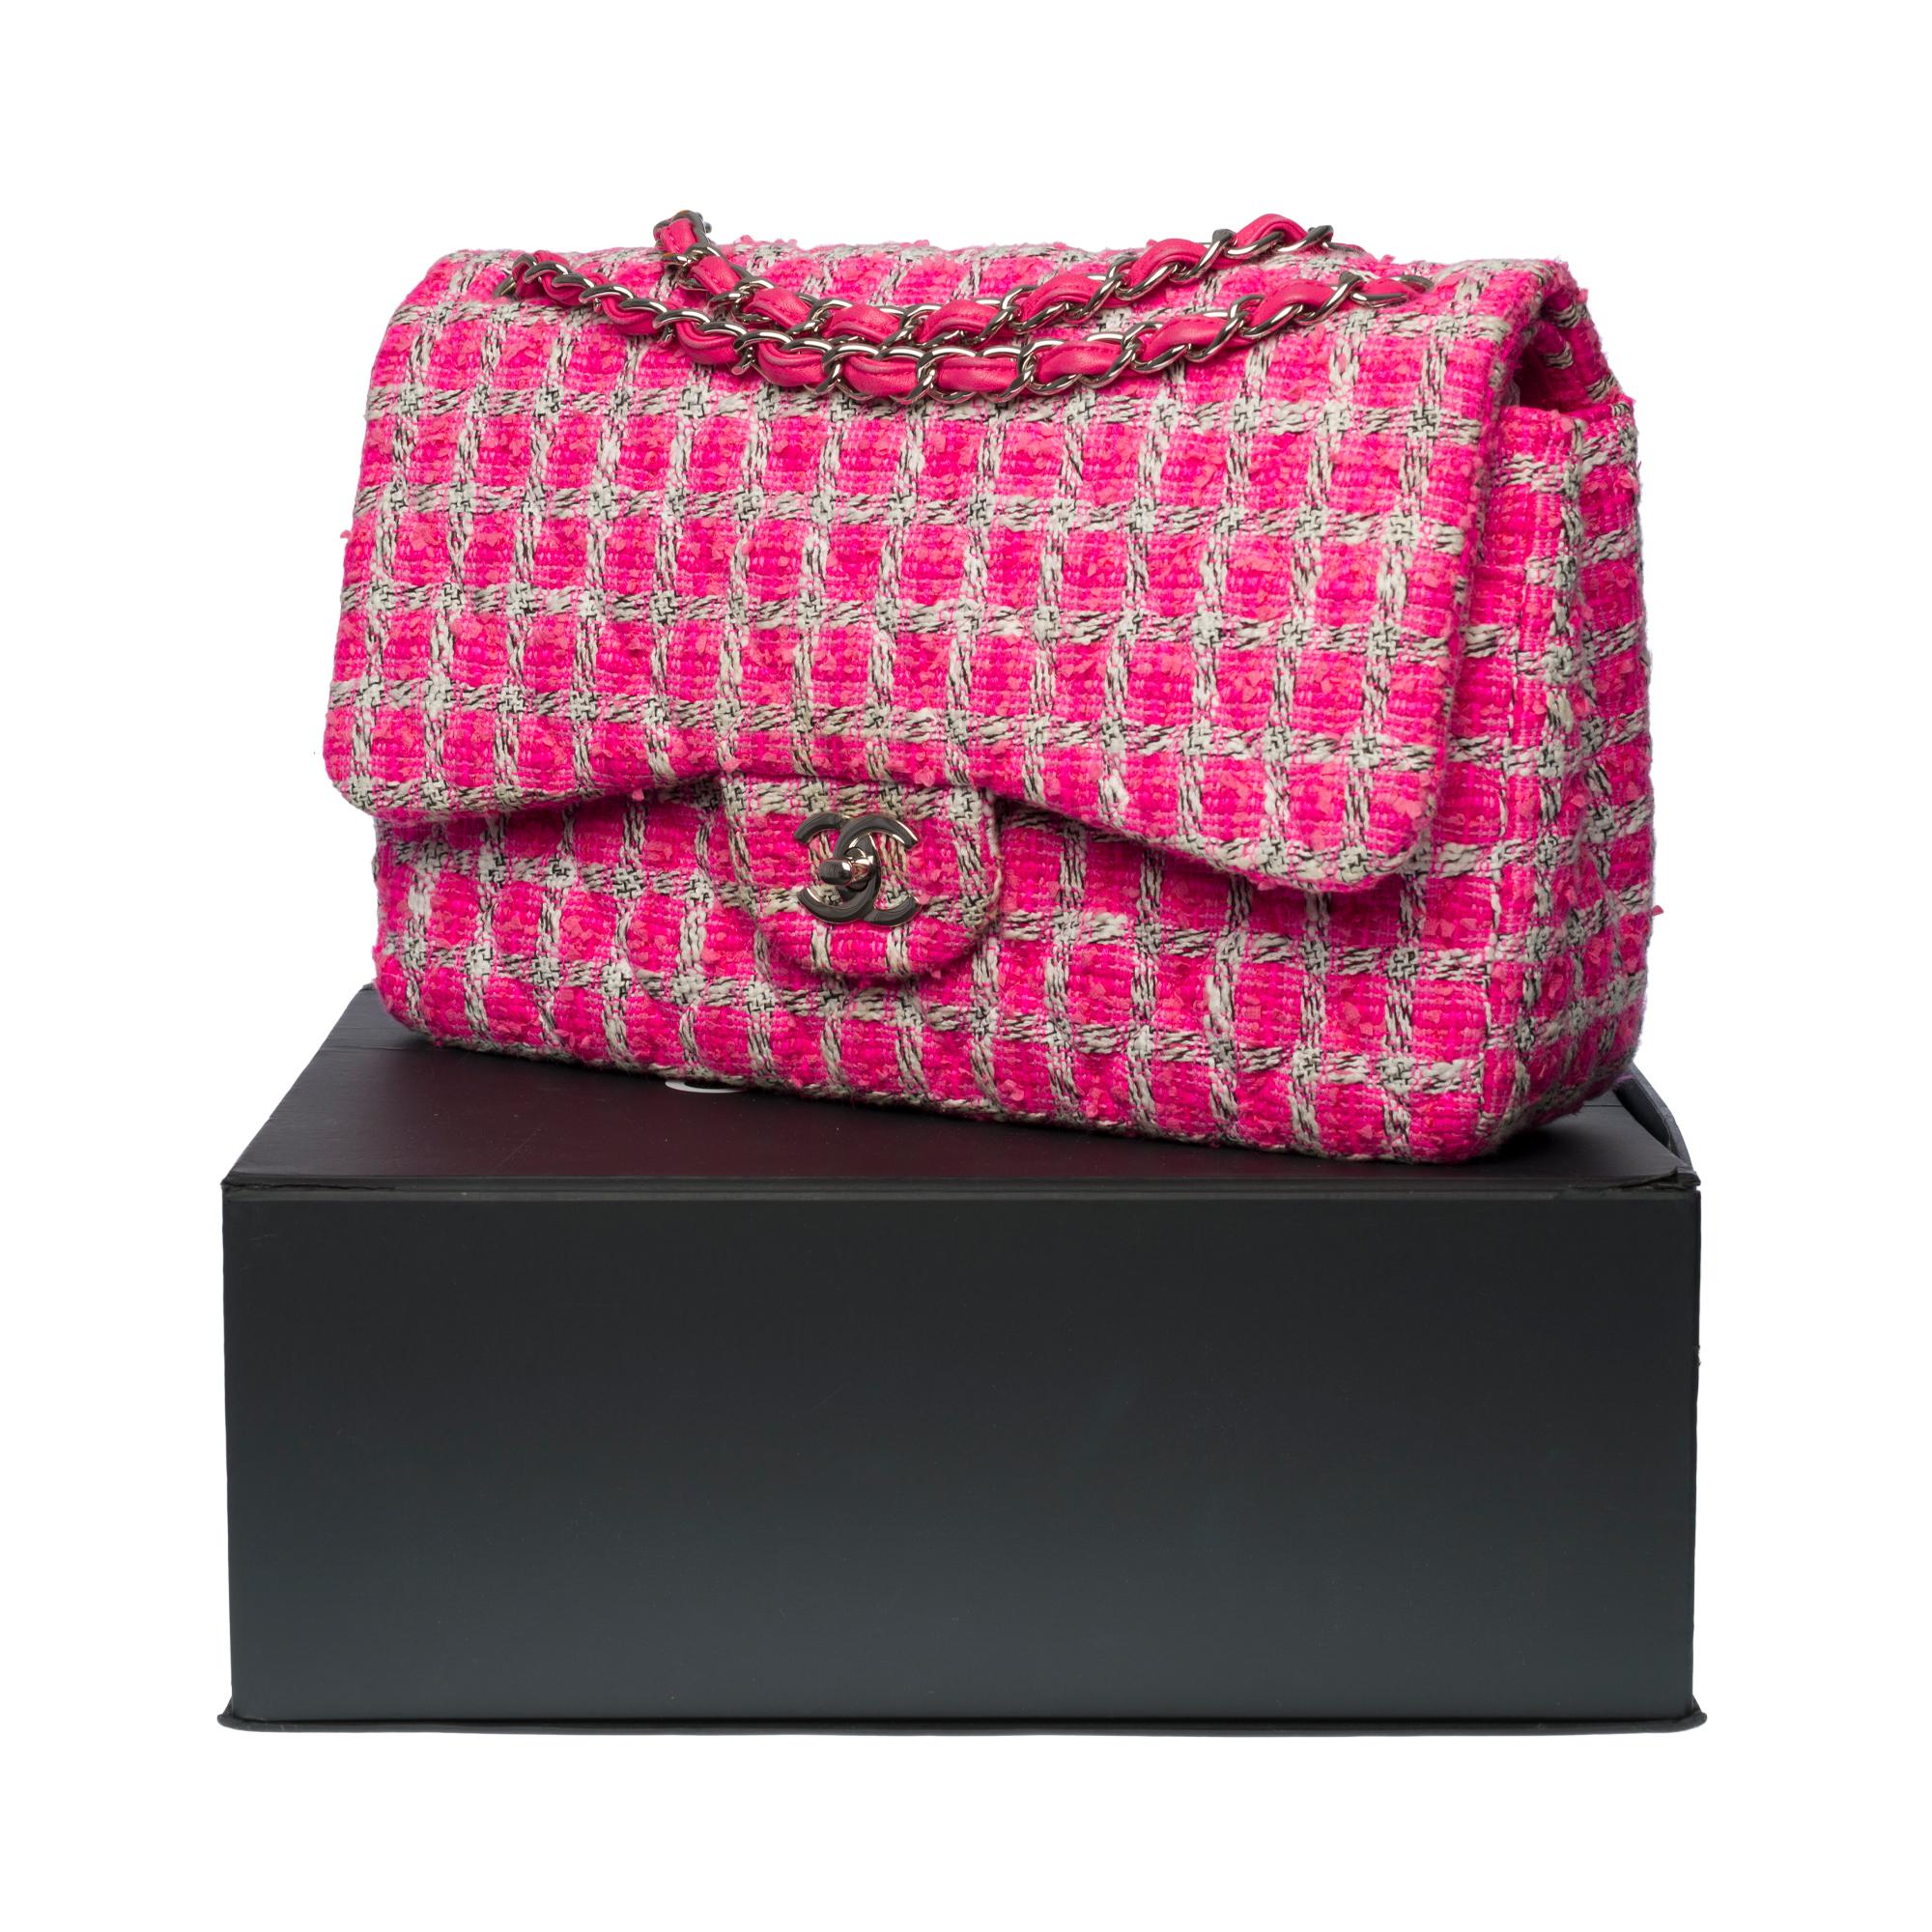 Limited Edition Chanel Timeless Jumbo Shoulder bag in Pink Tweed with SHW 7